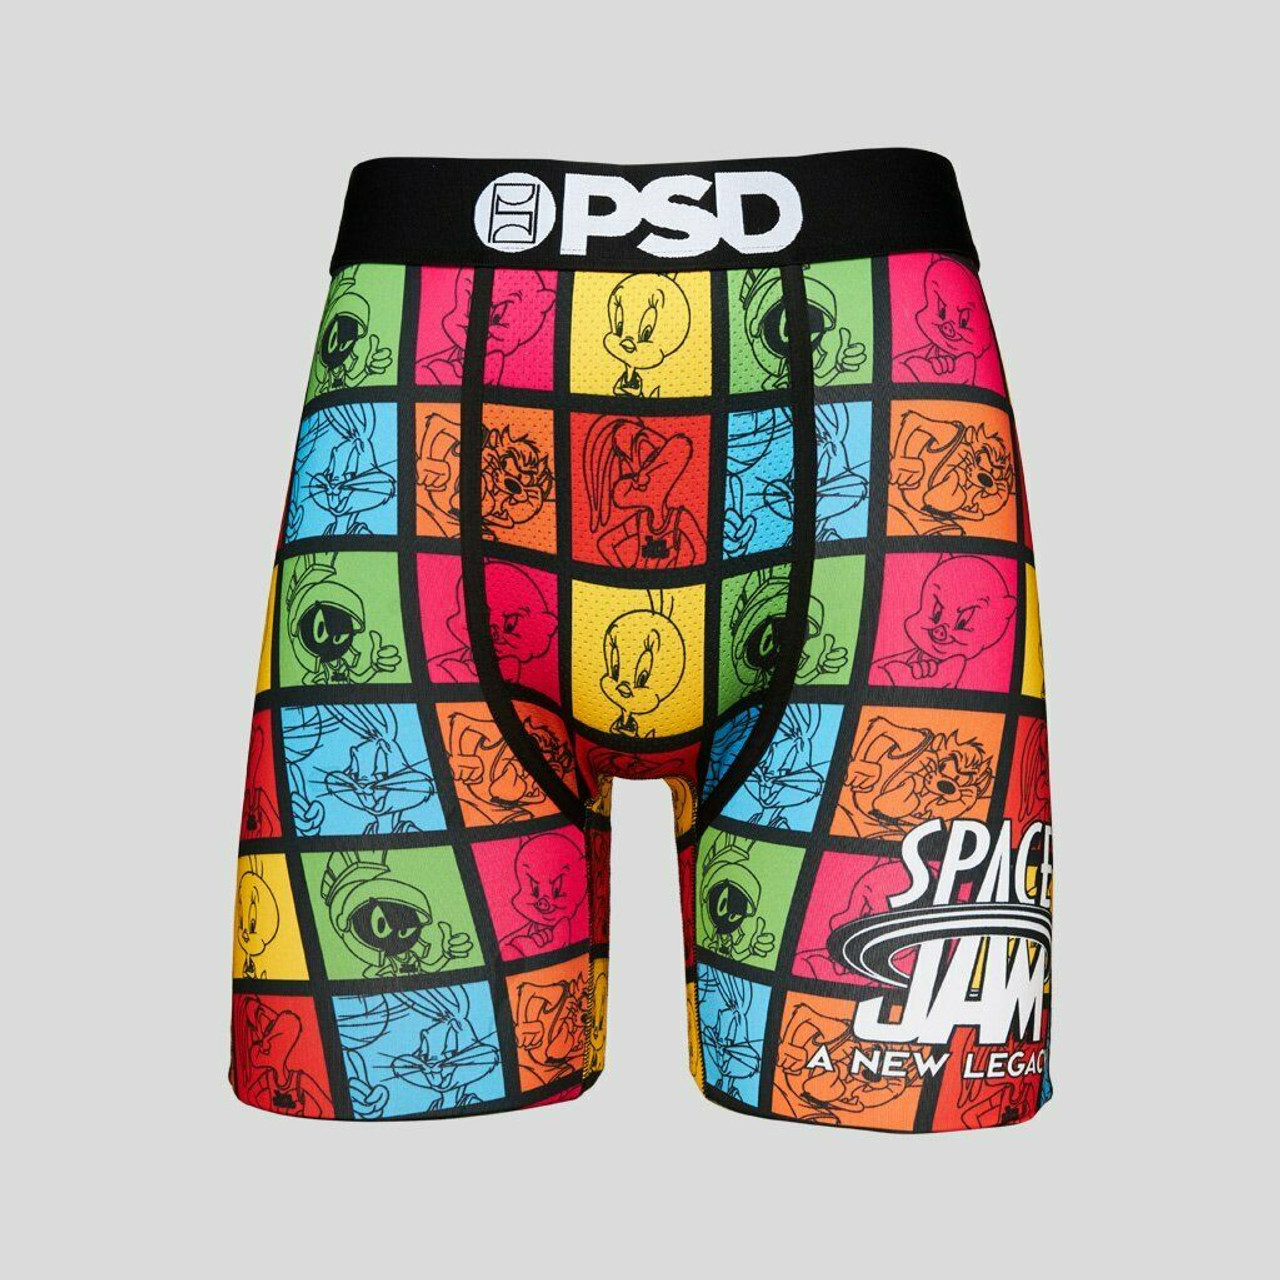 PSD The Tune Squad Bunch Space Jam 2 Athletic Boxers Briefs Underwear  221180027 - Fearless Apparel